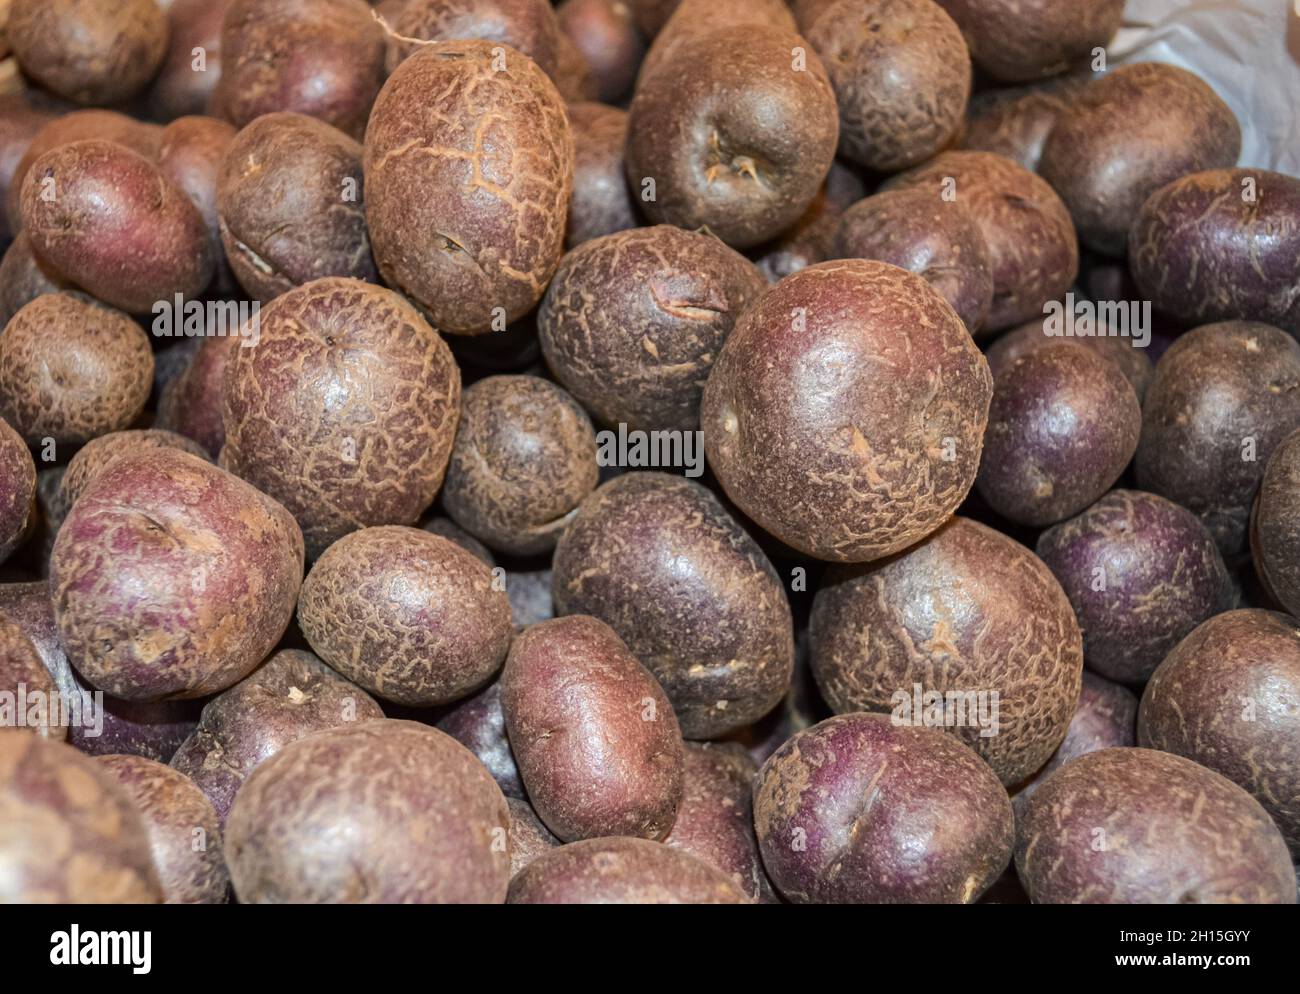 Blue potatoes for sale at a local farm stand. Long Island, New York. Stock Photo